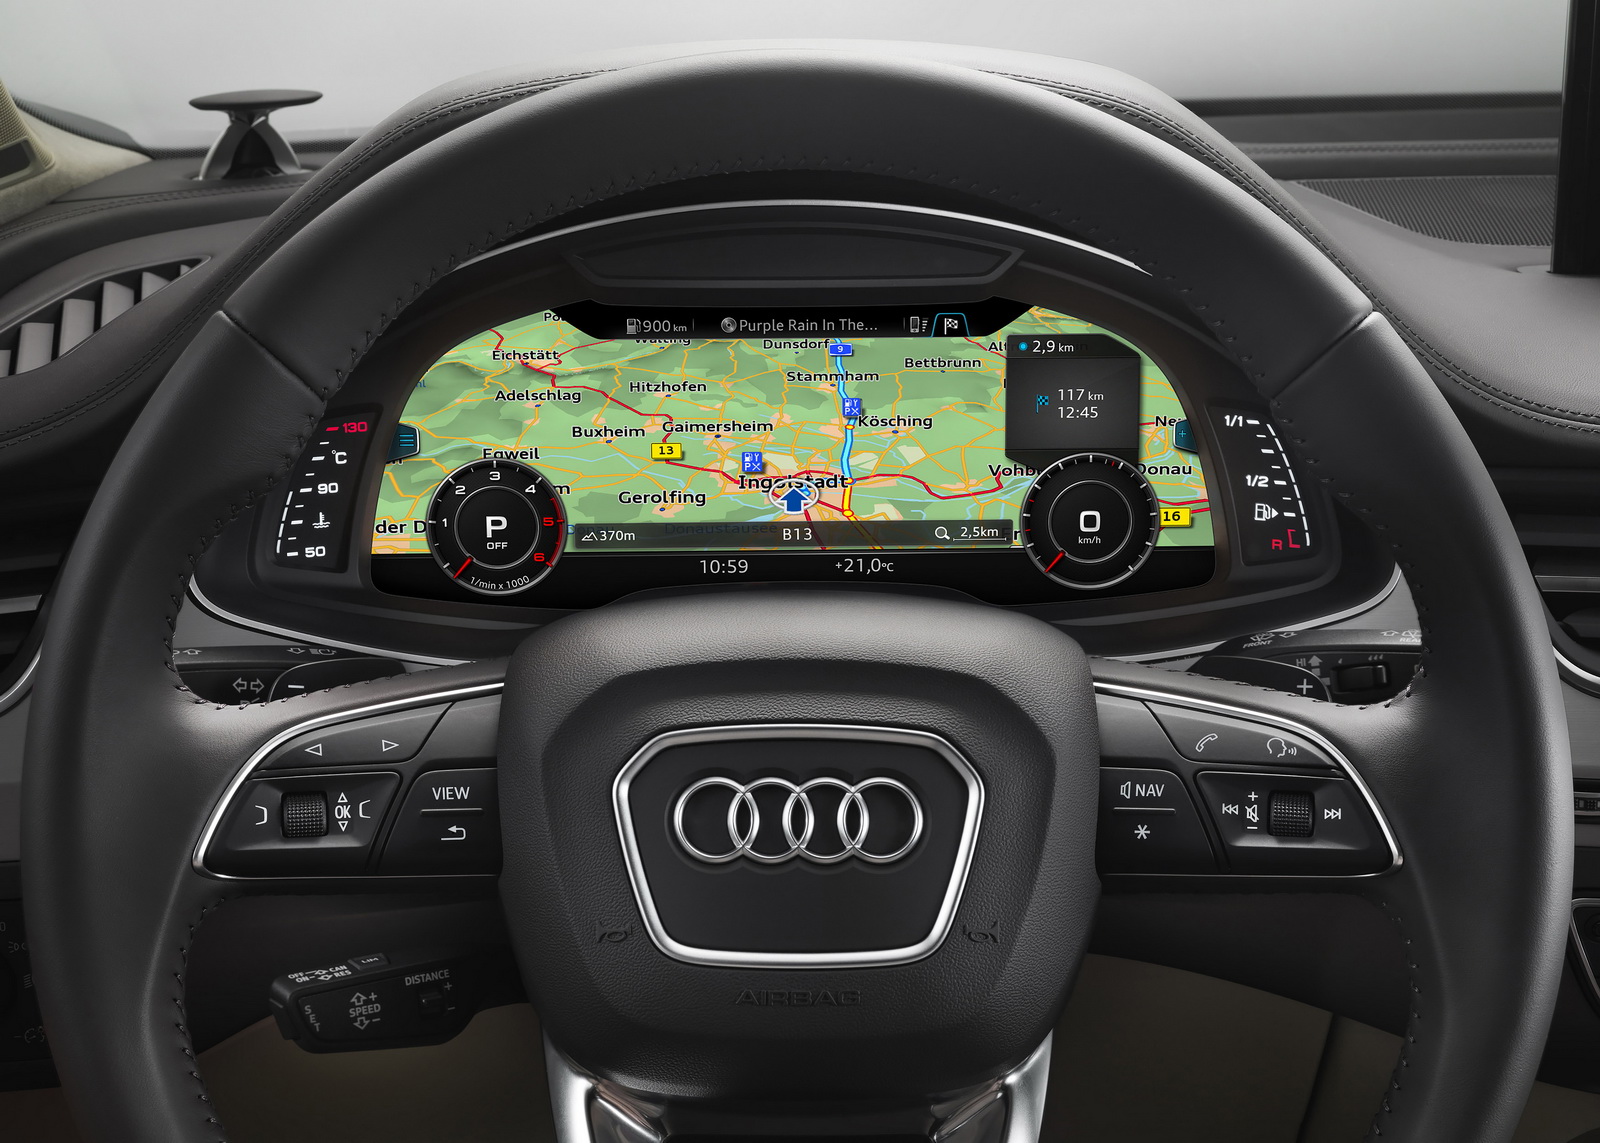 Nokia`s HERE Maps Acquisition Confirmed by Joint Venture BMW, Audi and Daimler